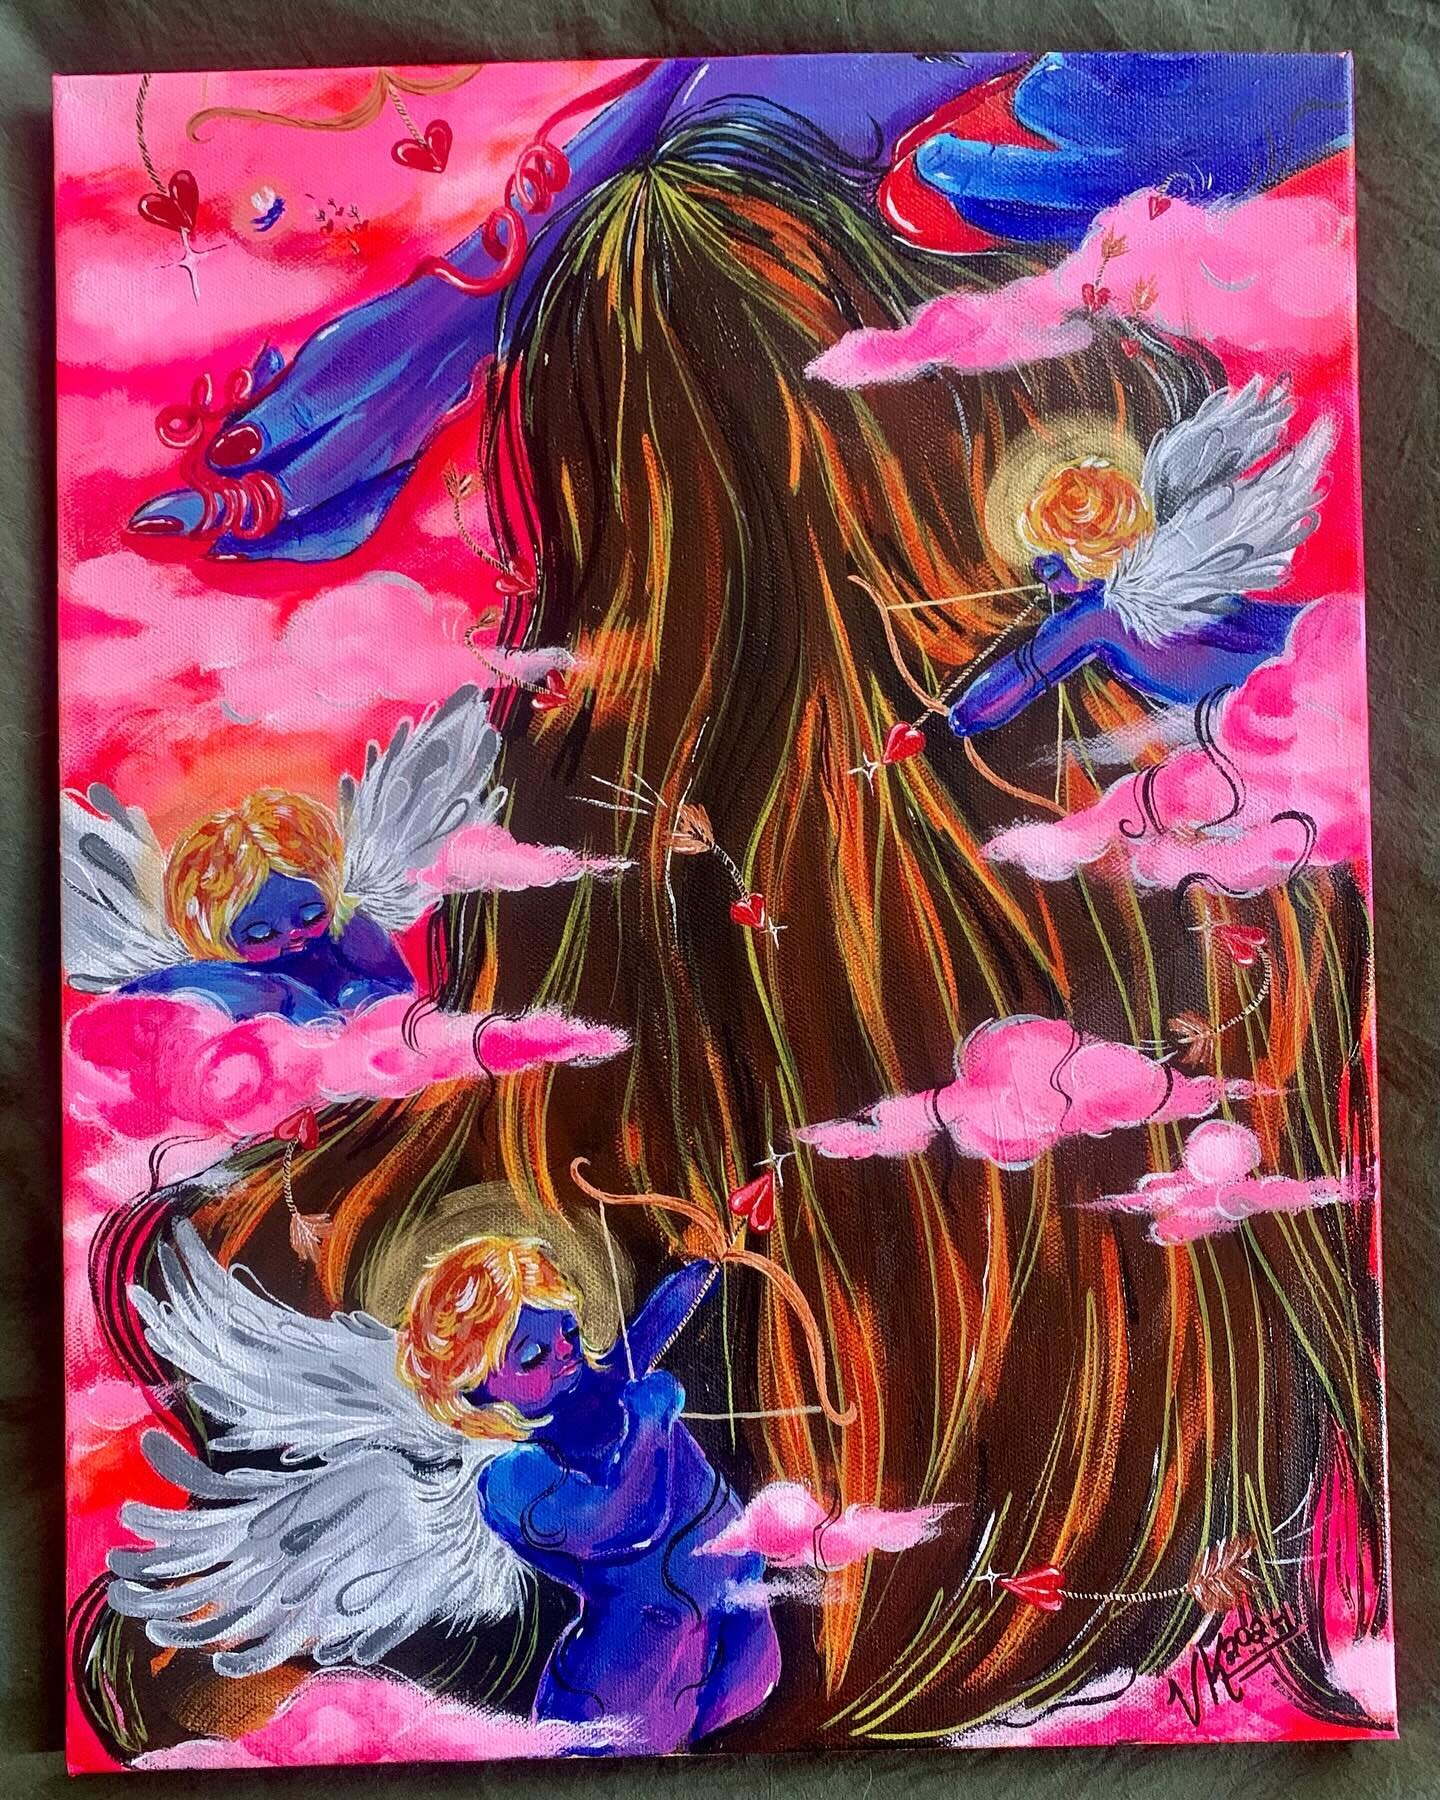 &ldquo;It&rsquo;s For You&rdquo;
14&rdquo;x18&rdquo;
Acrylic on canvas 
.
Inspired by @queenofheartsglobal for the 2024 show, GOT HEART💘 open for viewing NOW. 
Check out this piece and many others that are sure to give you that warm fuzzy feeling 
.